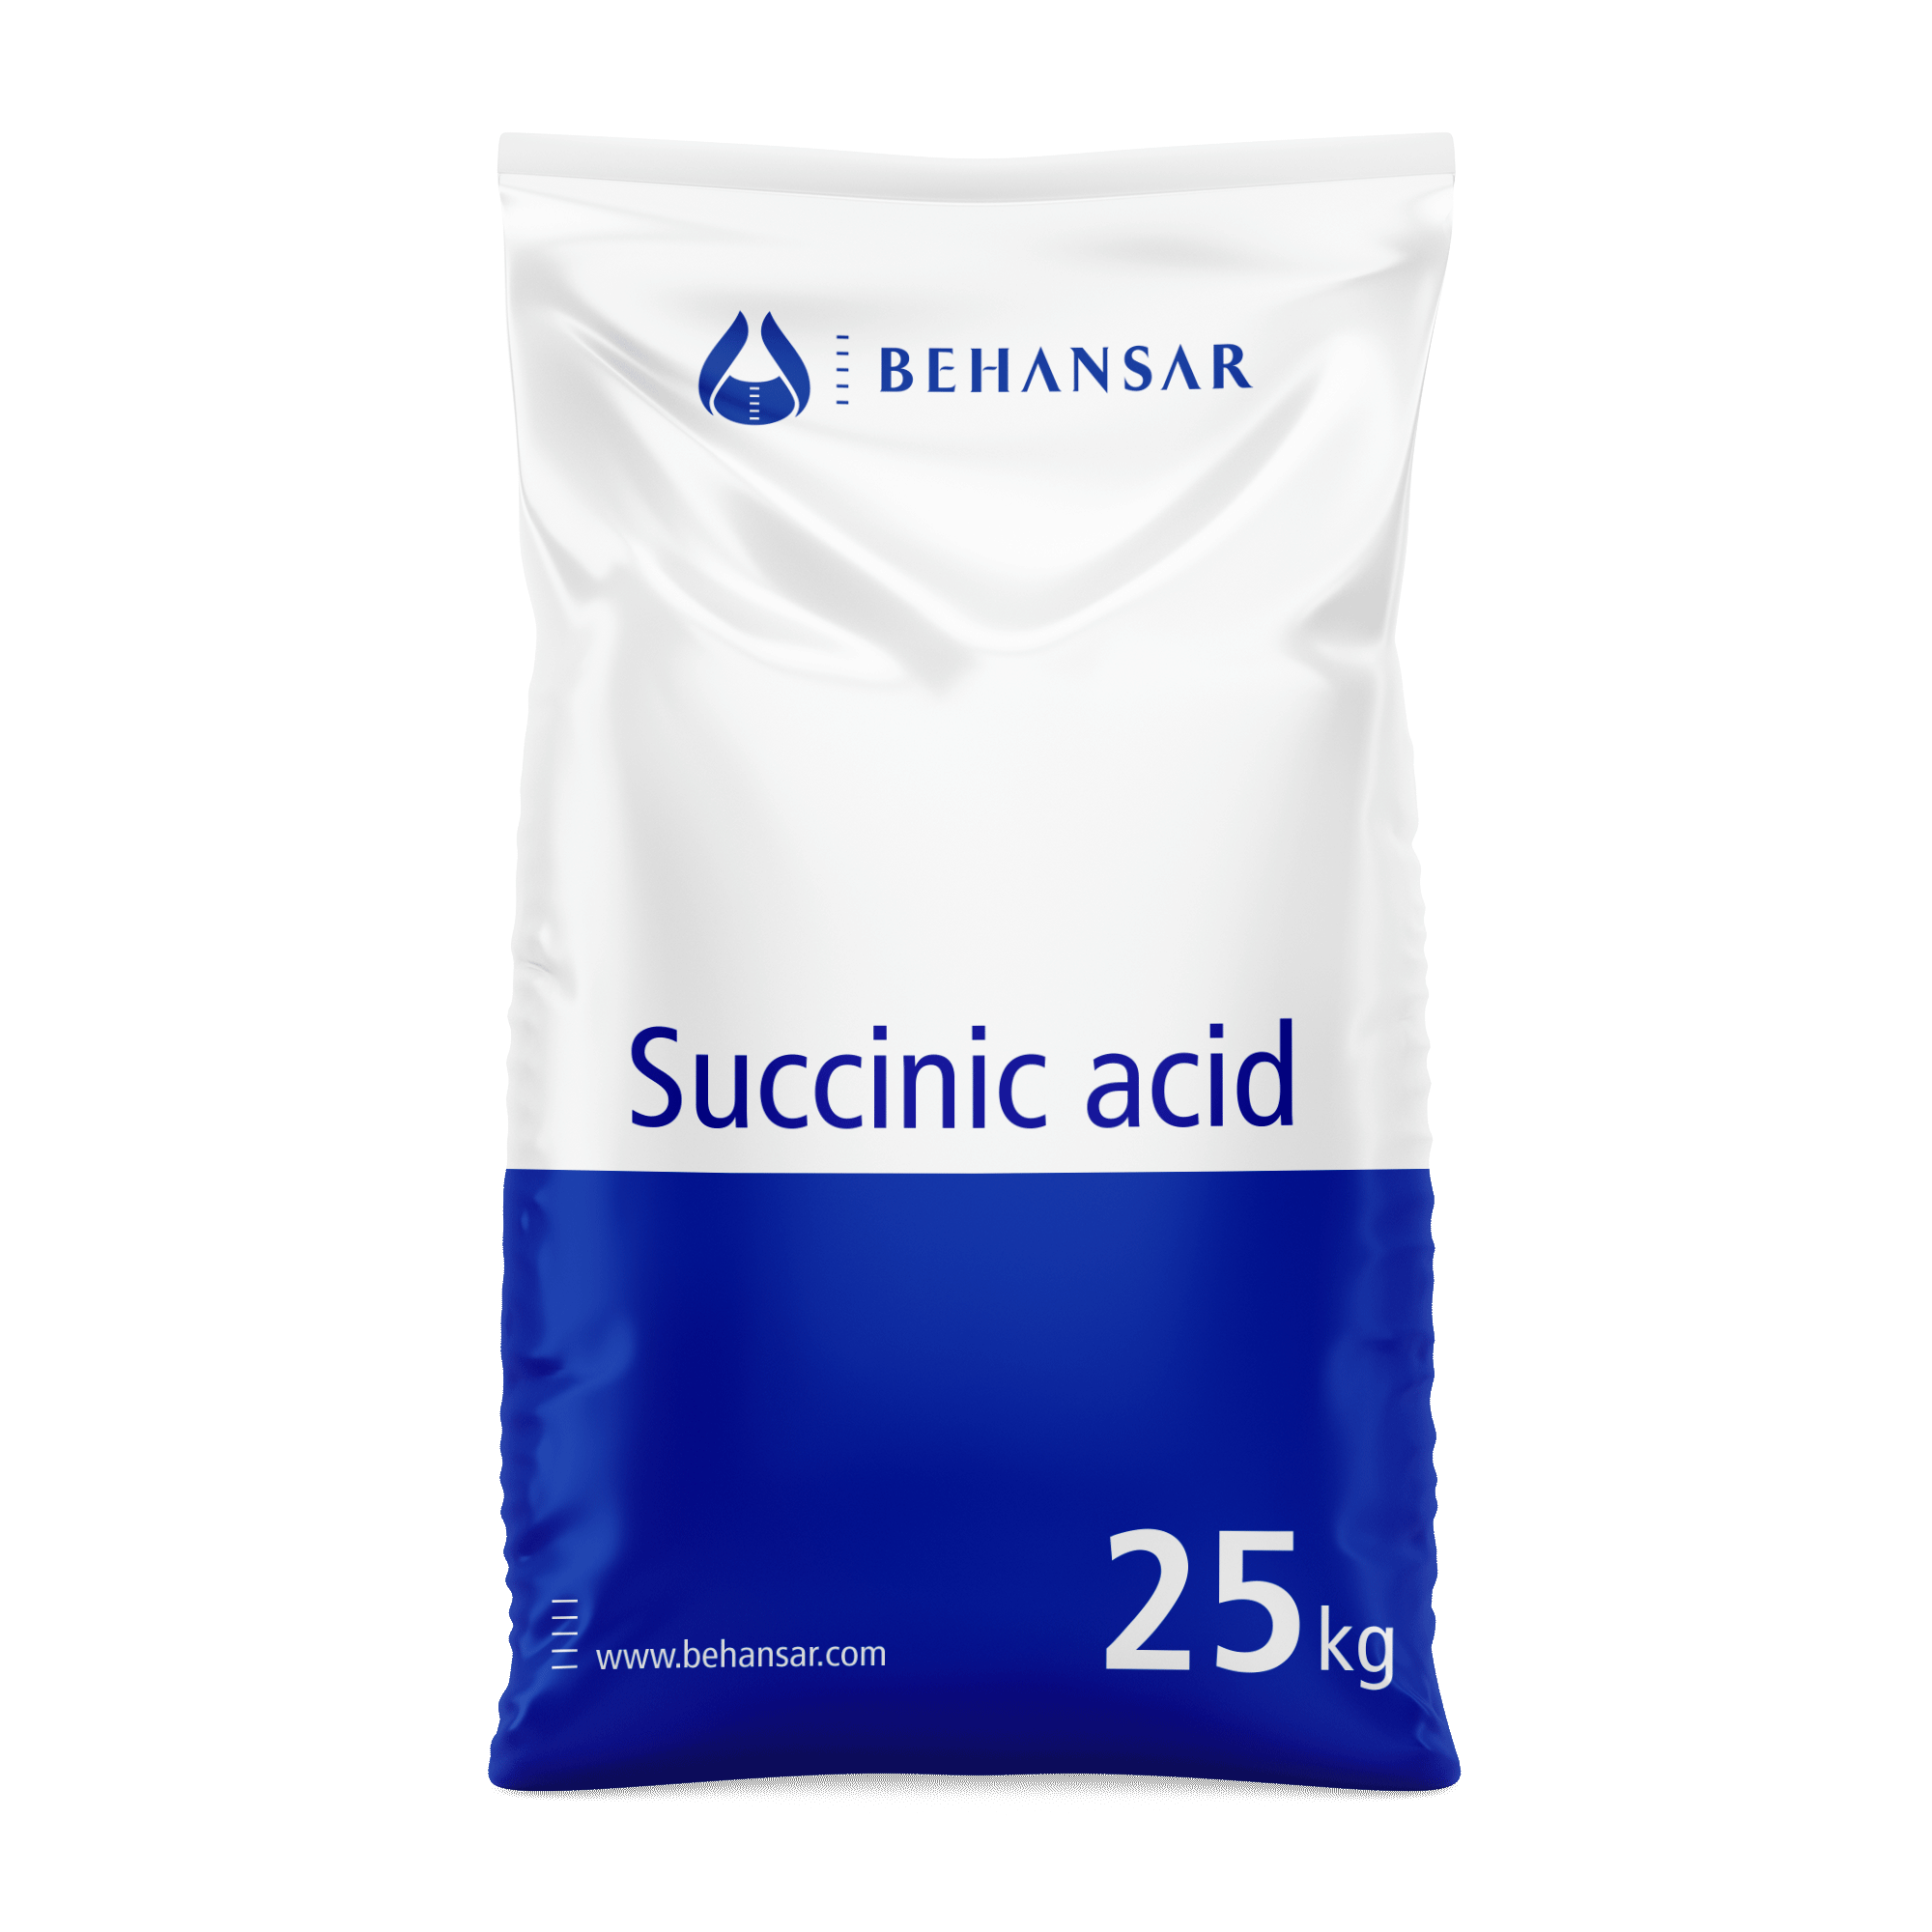 Succinic acid is one of the products of Behansar Co